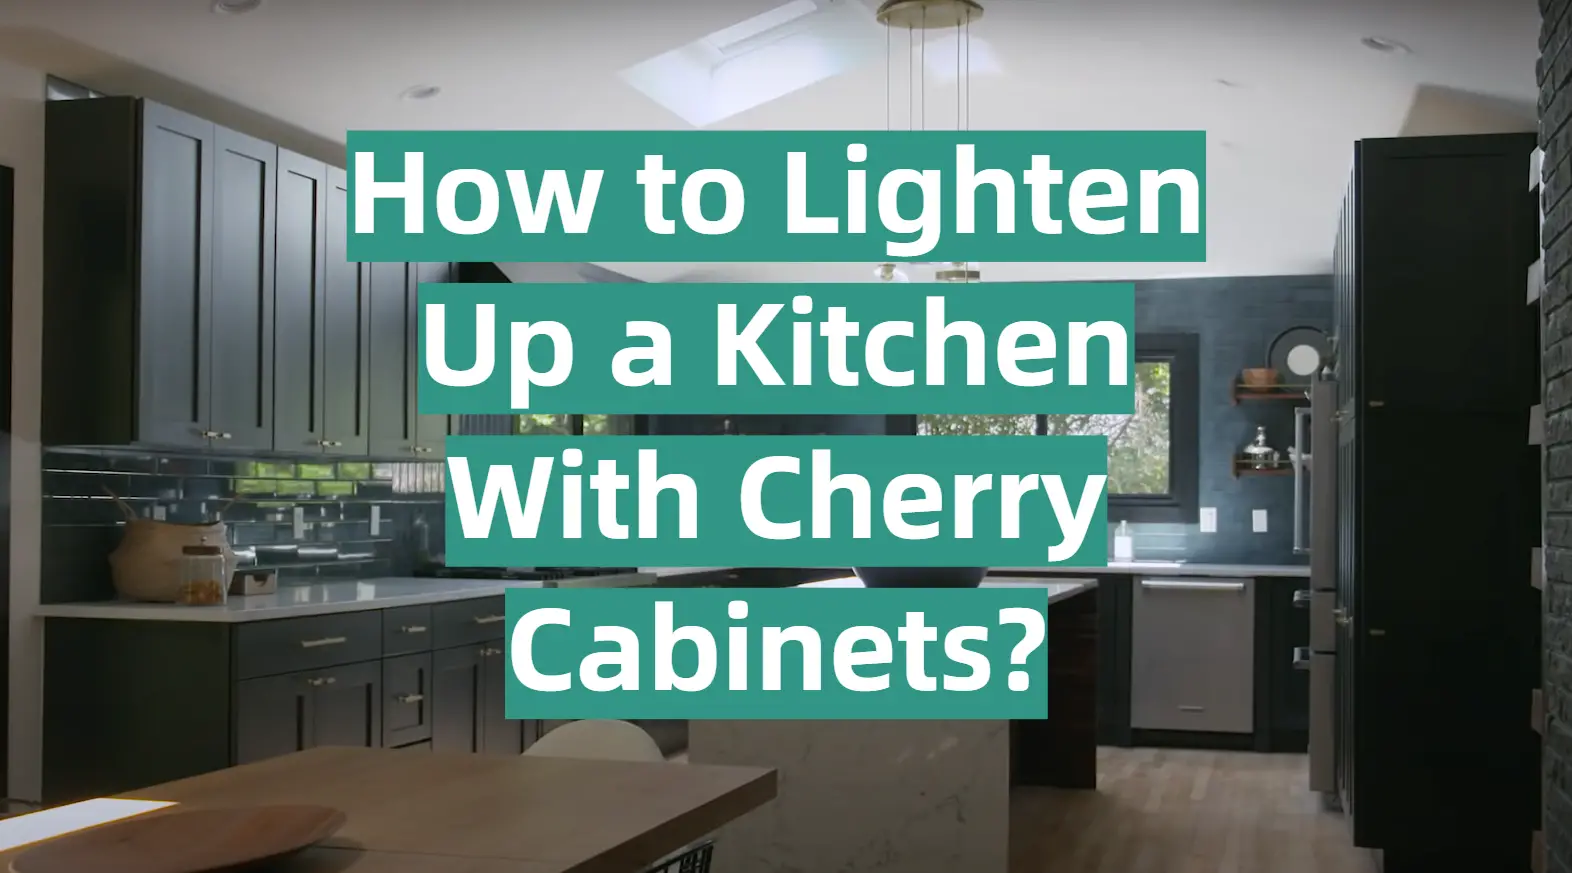 Is cherry cabinetry outdated?